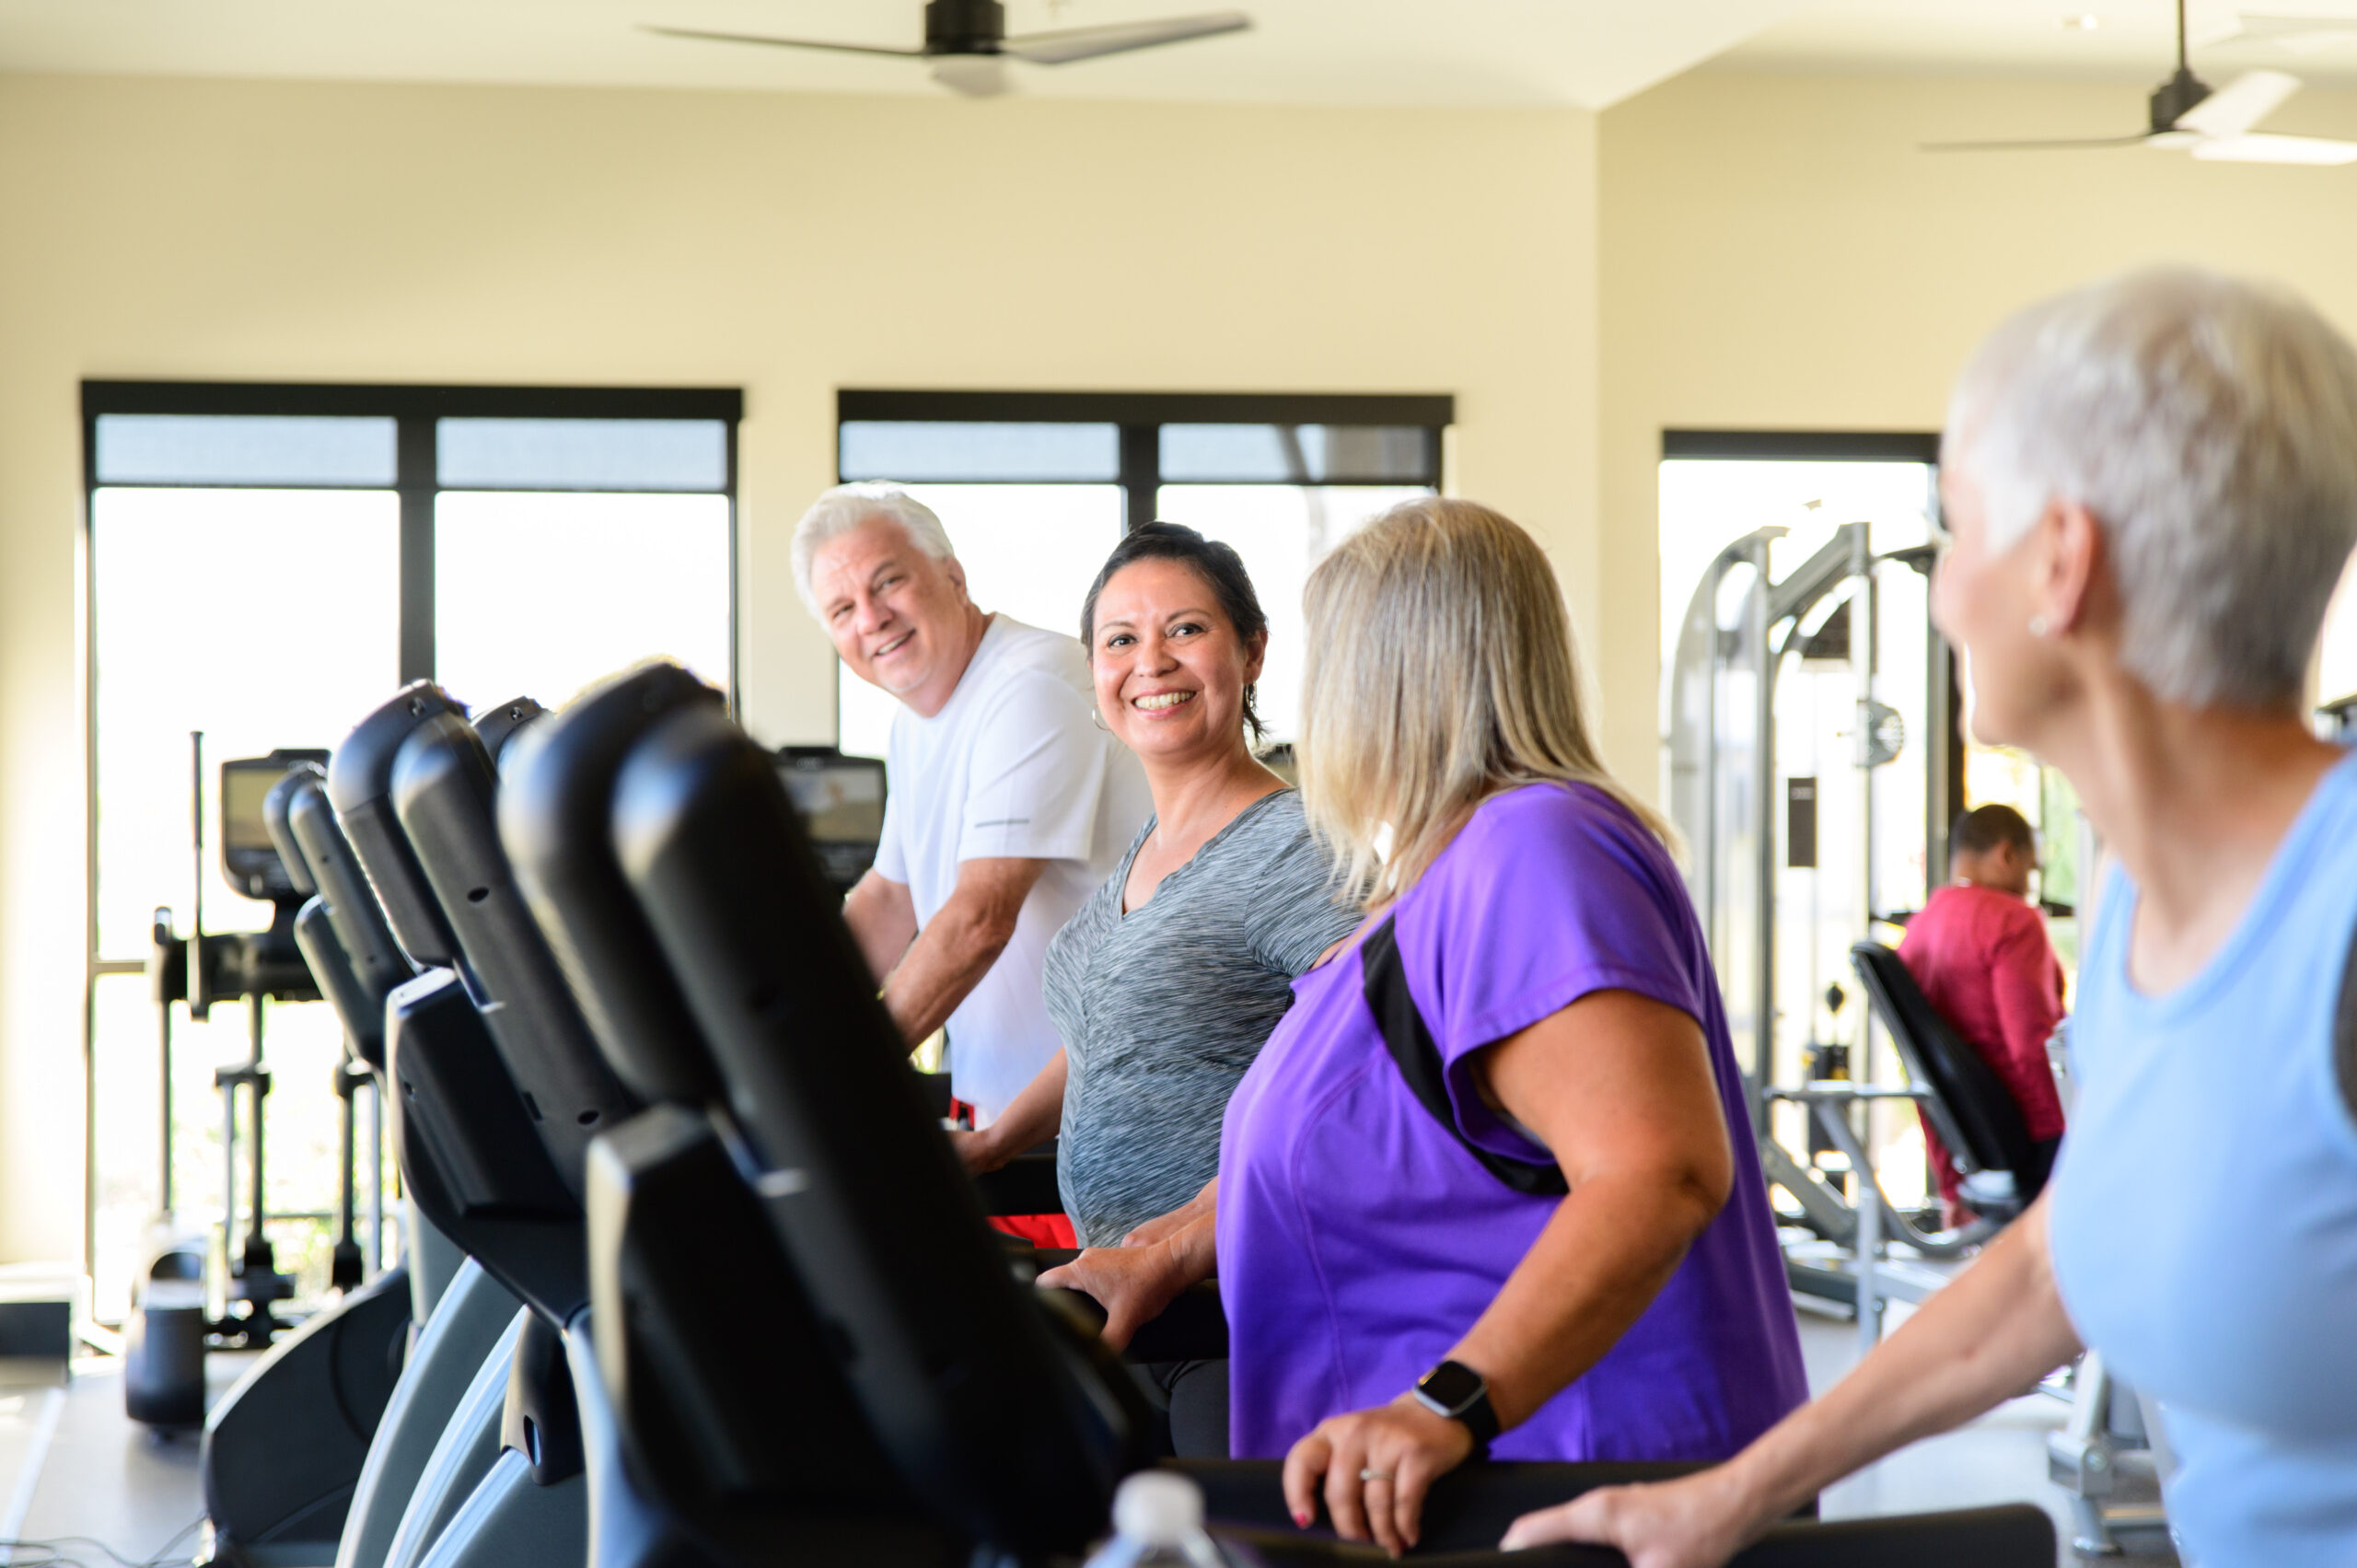 55+ Active Adult OakwoodLife treadmill group in fitness center